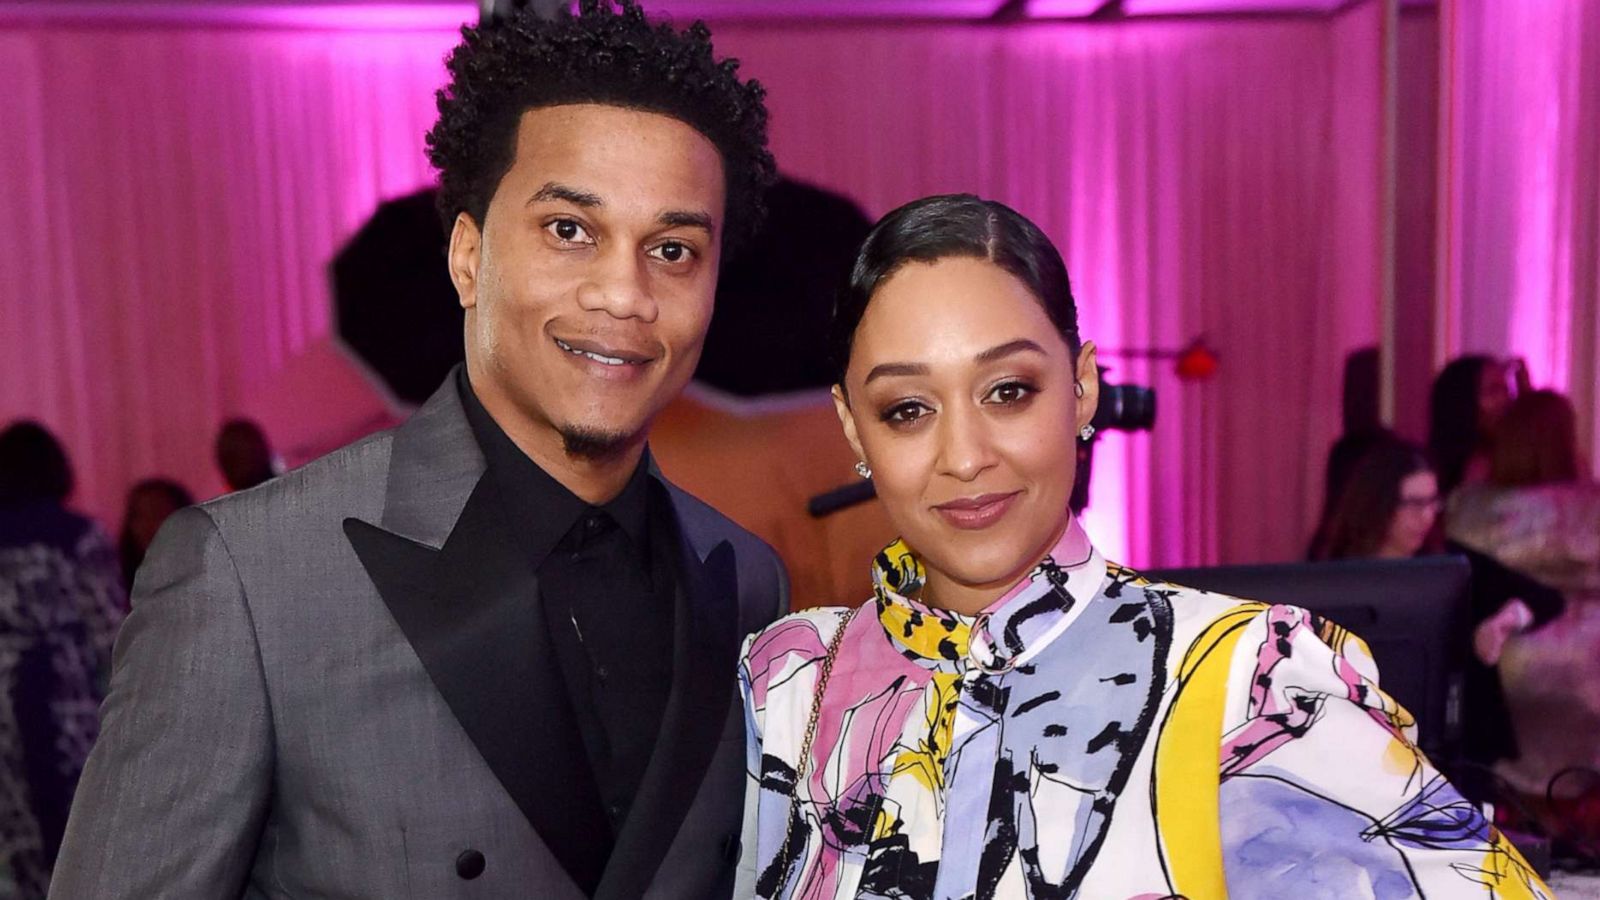 Tia Mowry announces split from husband Cory Hardrict after 14 years of  marriage - Good Morning America